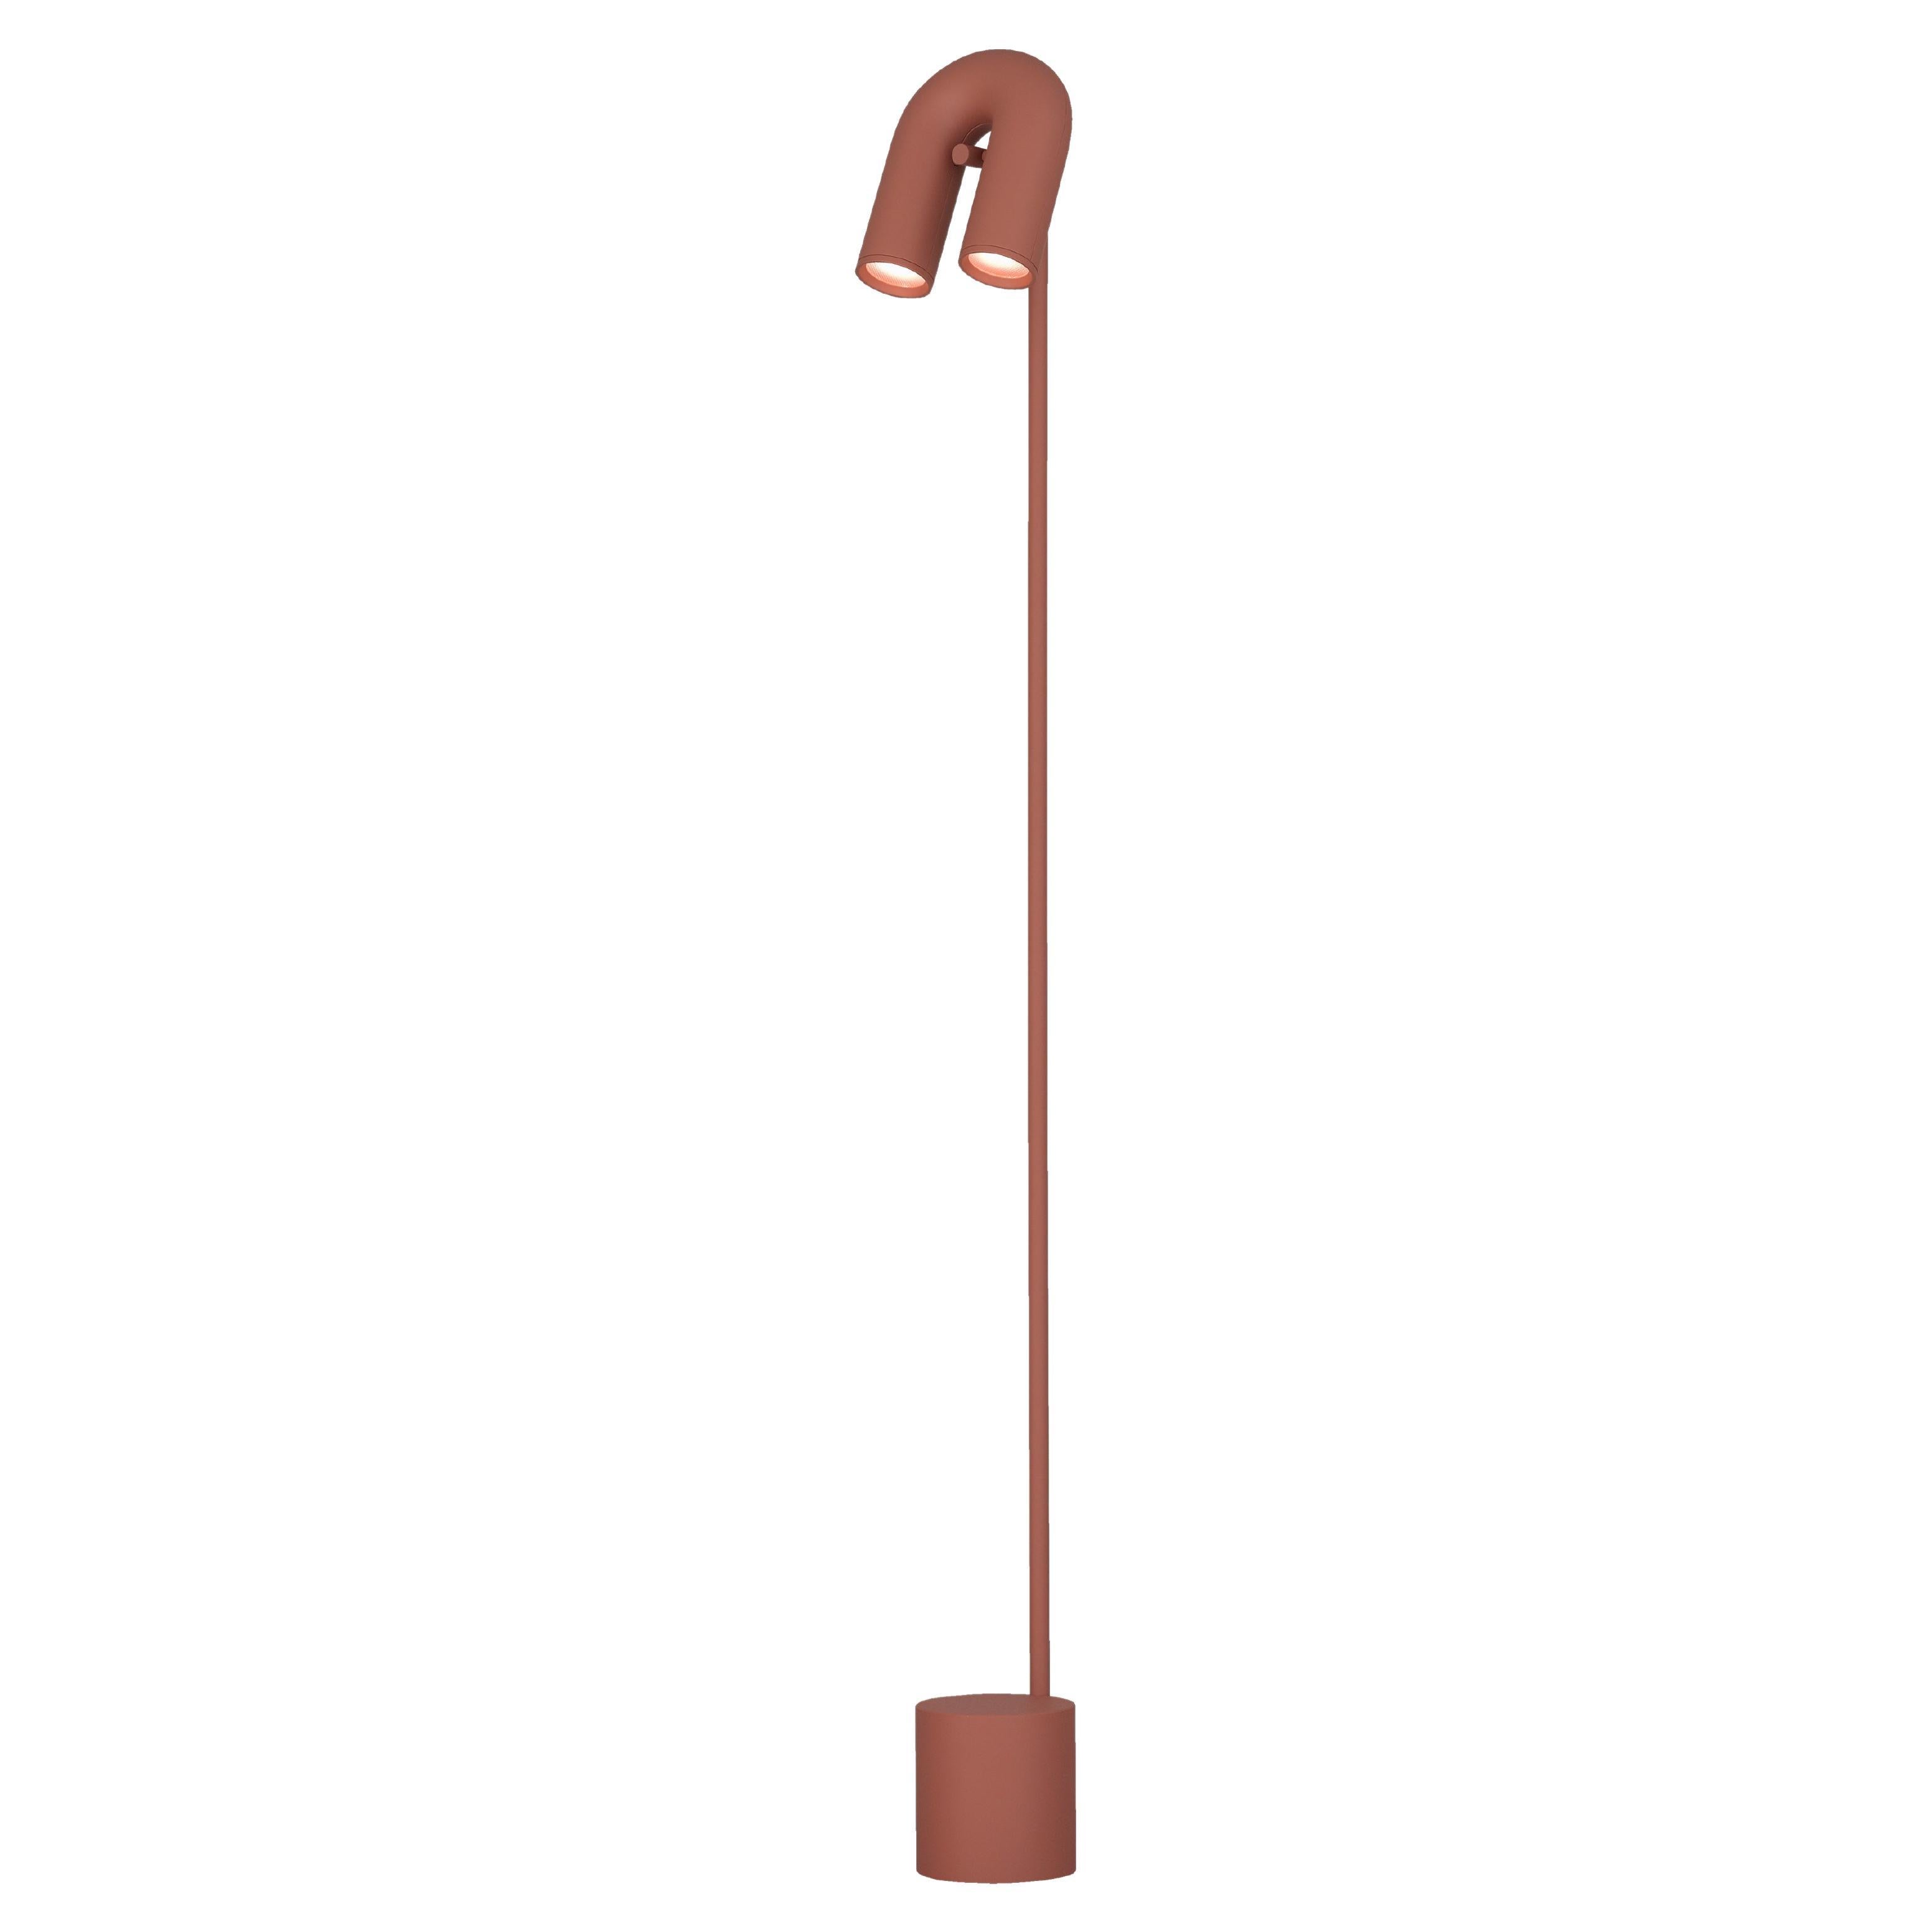 Cirkus floor lamps by AGO Lighting
UL Listed

Coated ABS, aluminum, steel
LED GU10 max 6W x 2, 110-230V

Four colors available: Terracotta, charcoal, green, grey
Dimensions: H 130.5 cm x W 11.5 cm

The Cirkus floor lamps complete the collection of